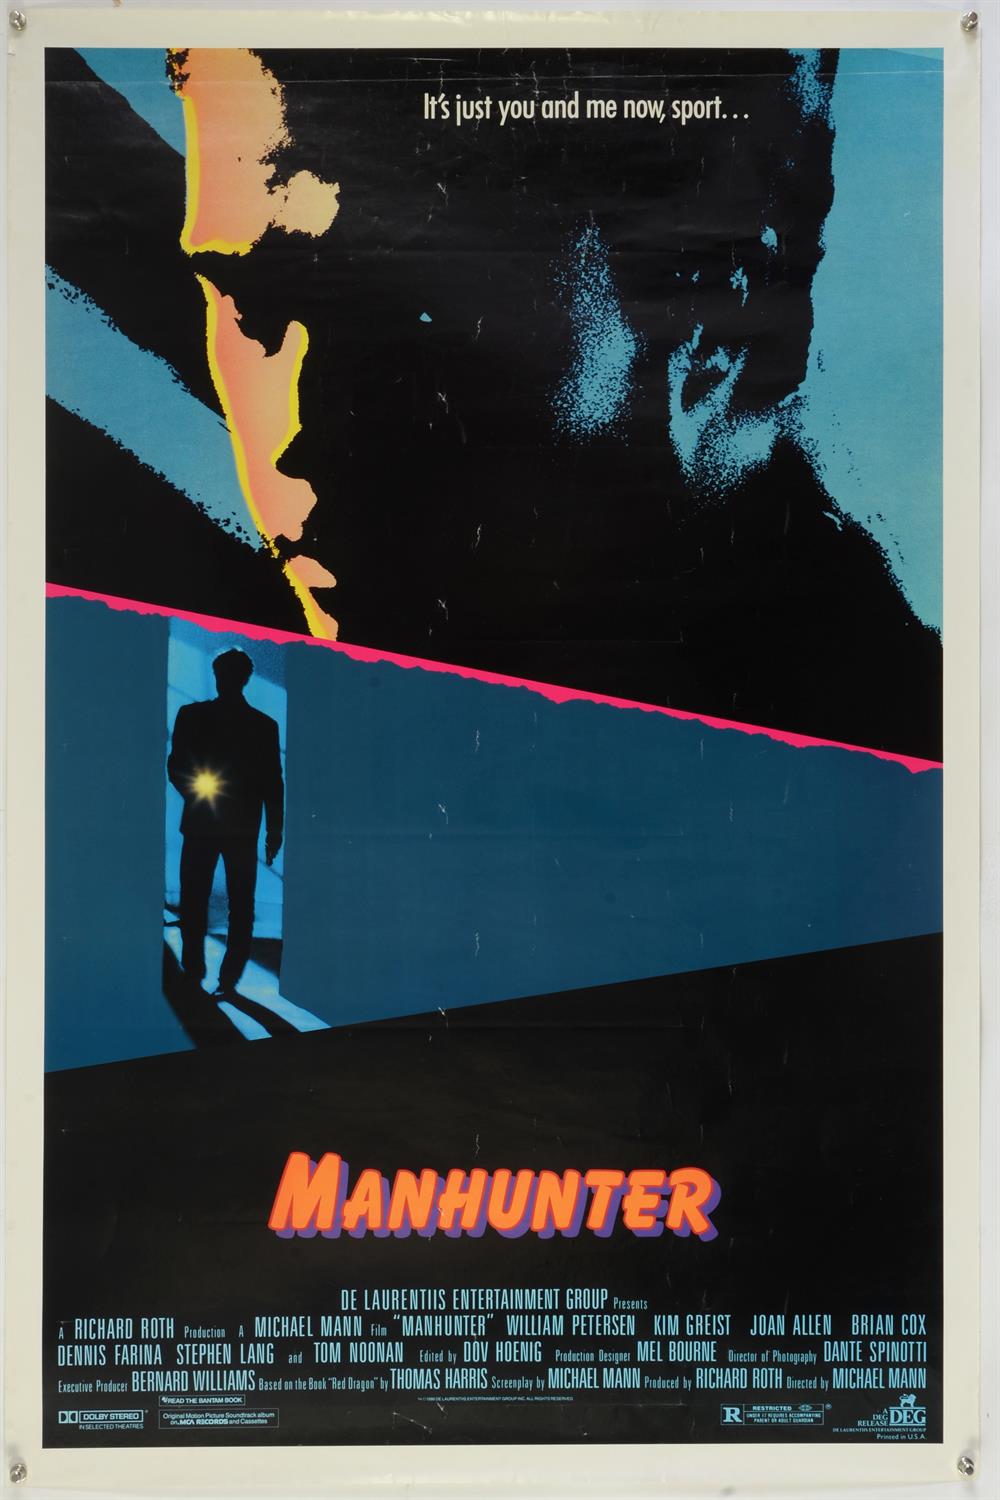 Manhunter (1986) US One Sheet film poster, this being the “sport style” version for this